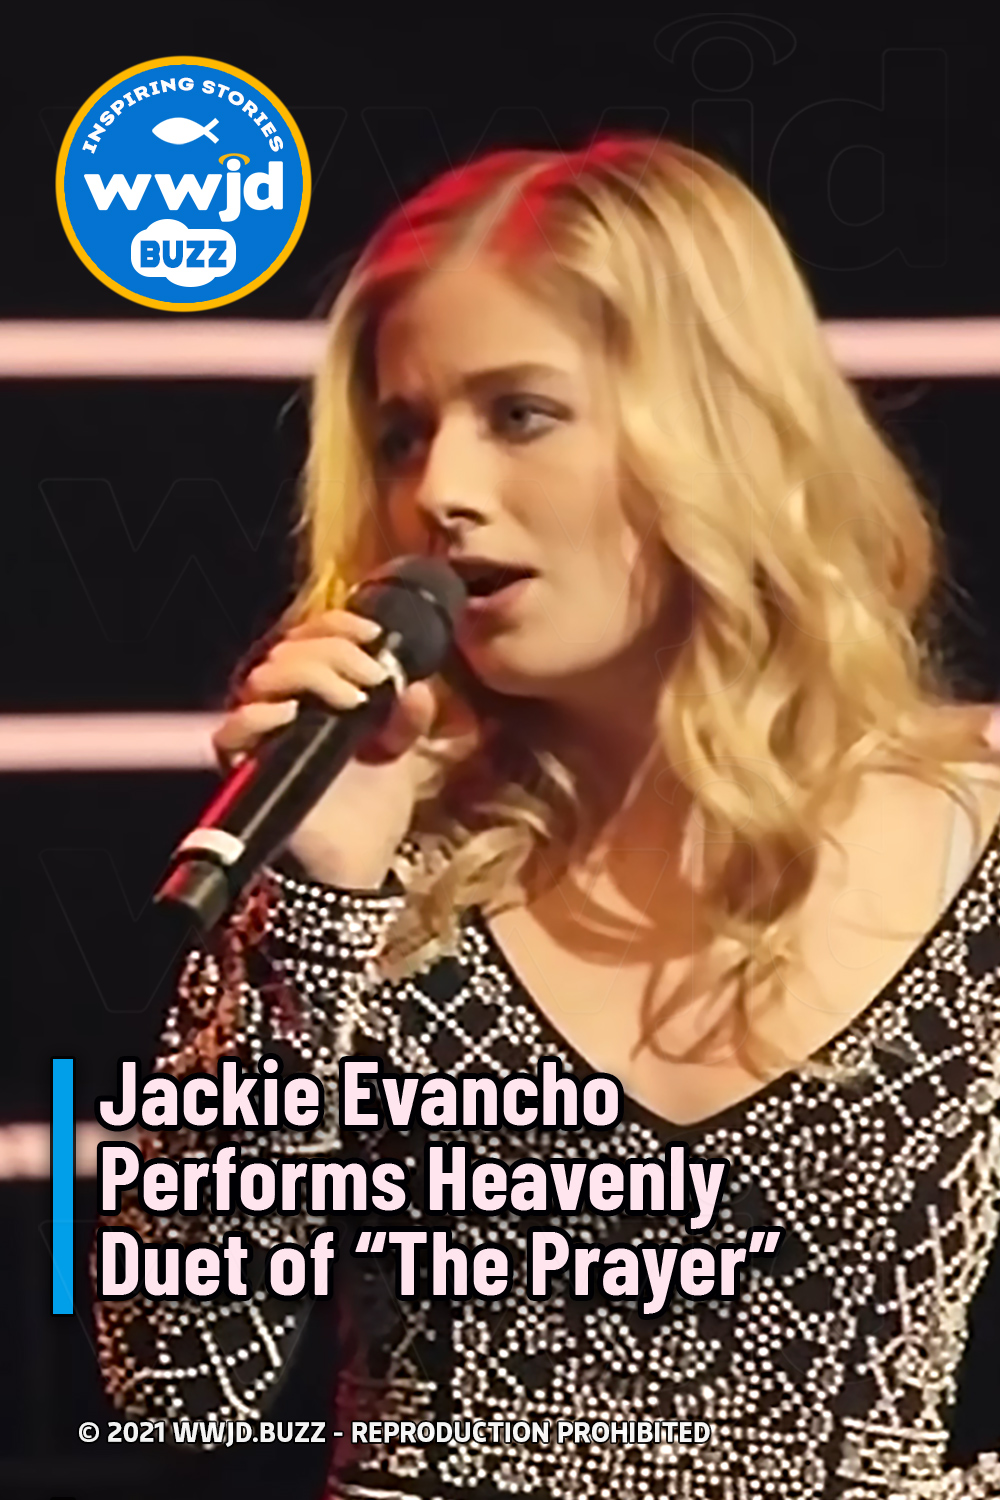 Jackie Evancho Performs Heavenly Duet of “The Prayer”